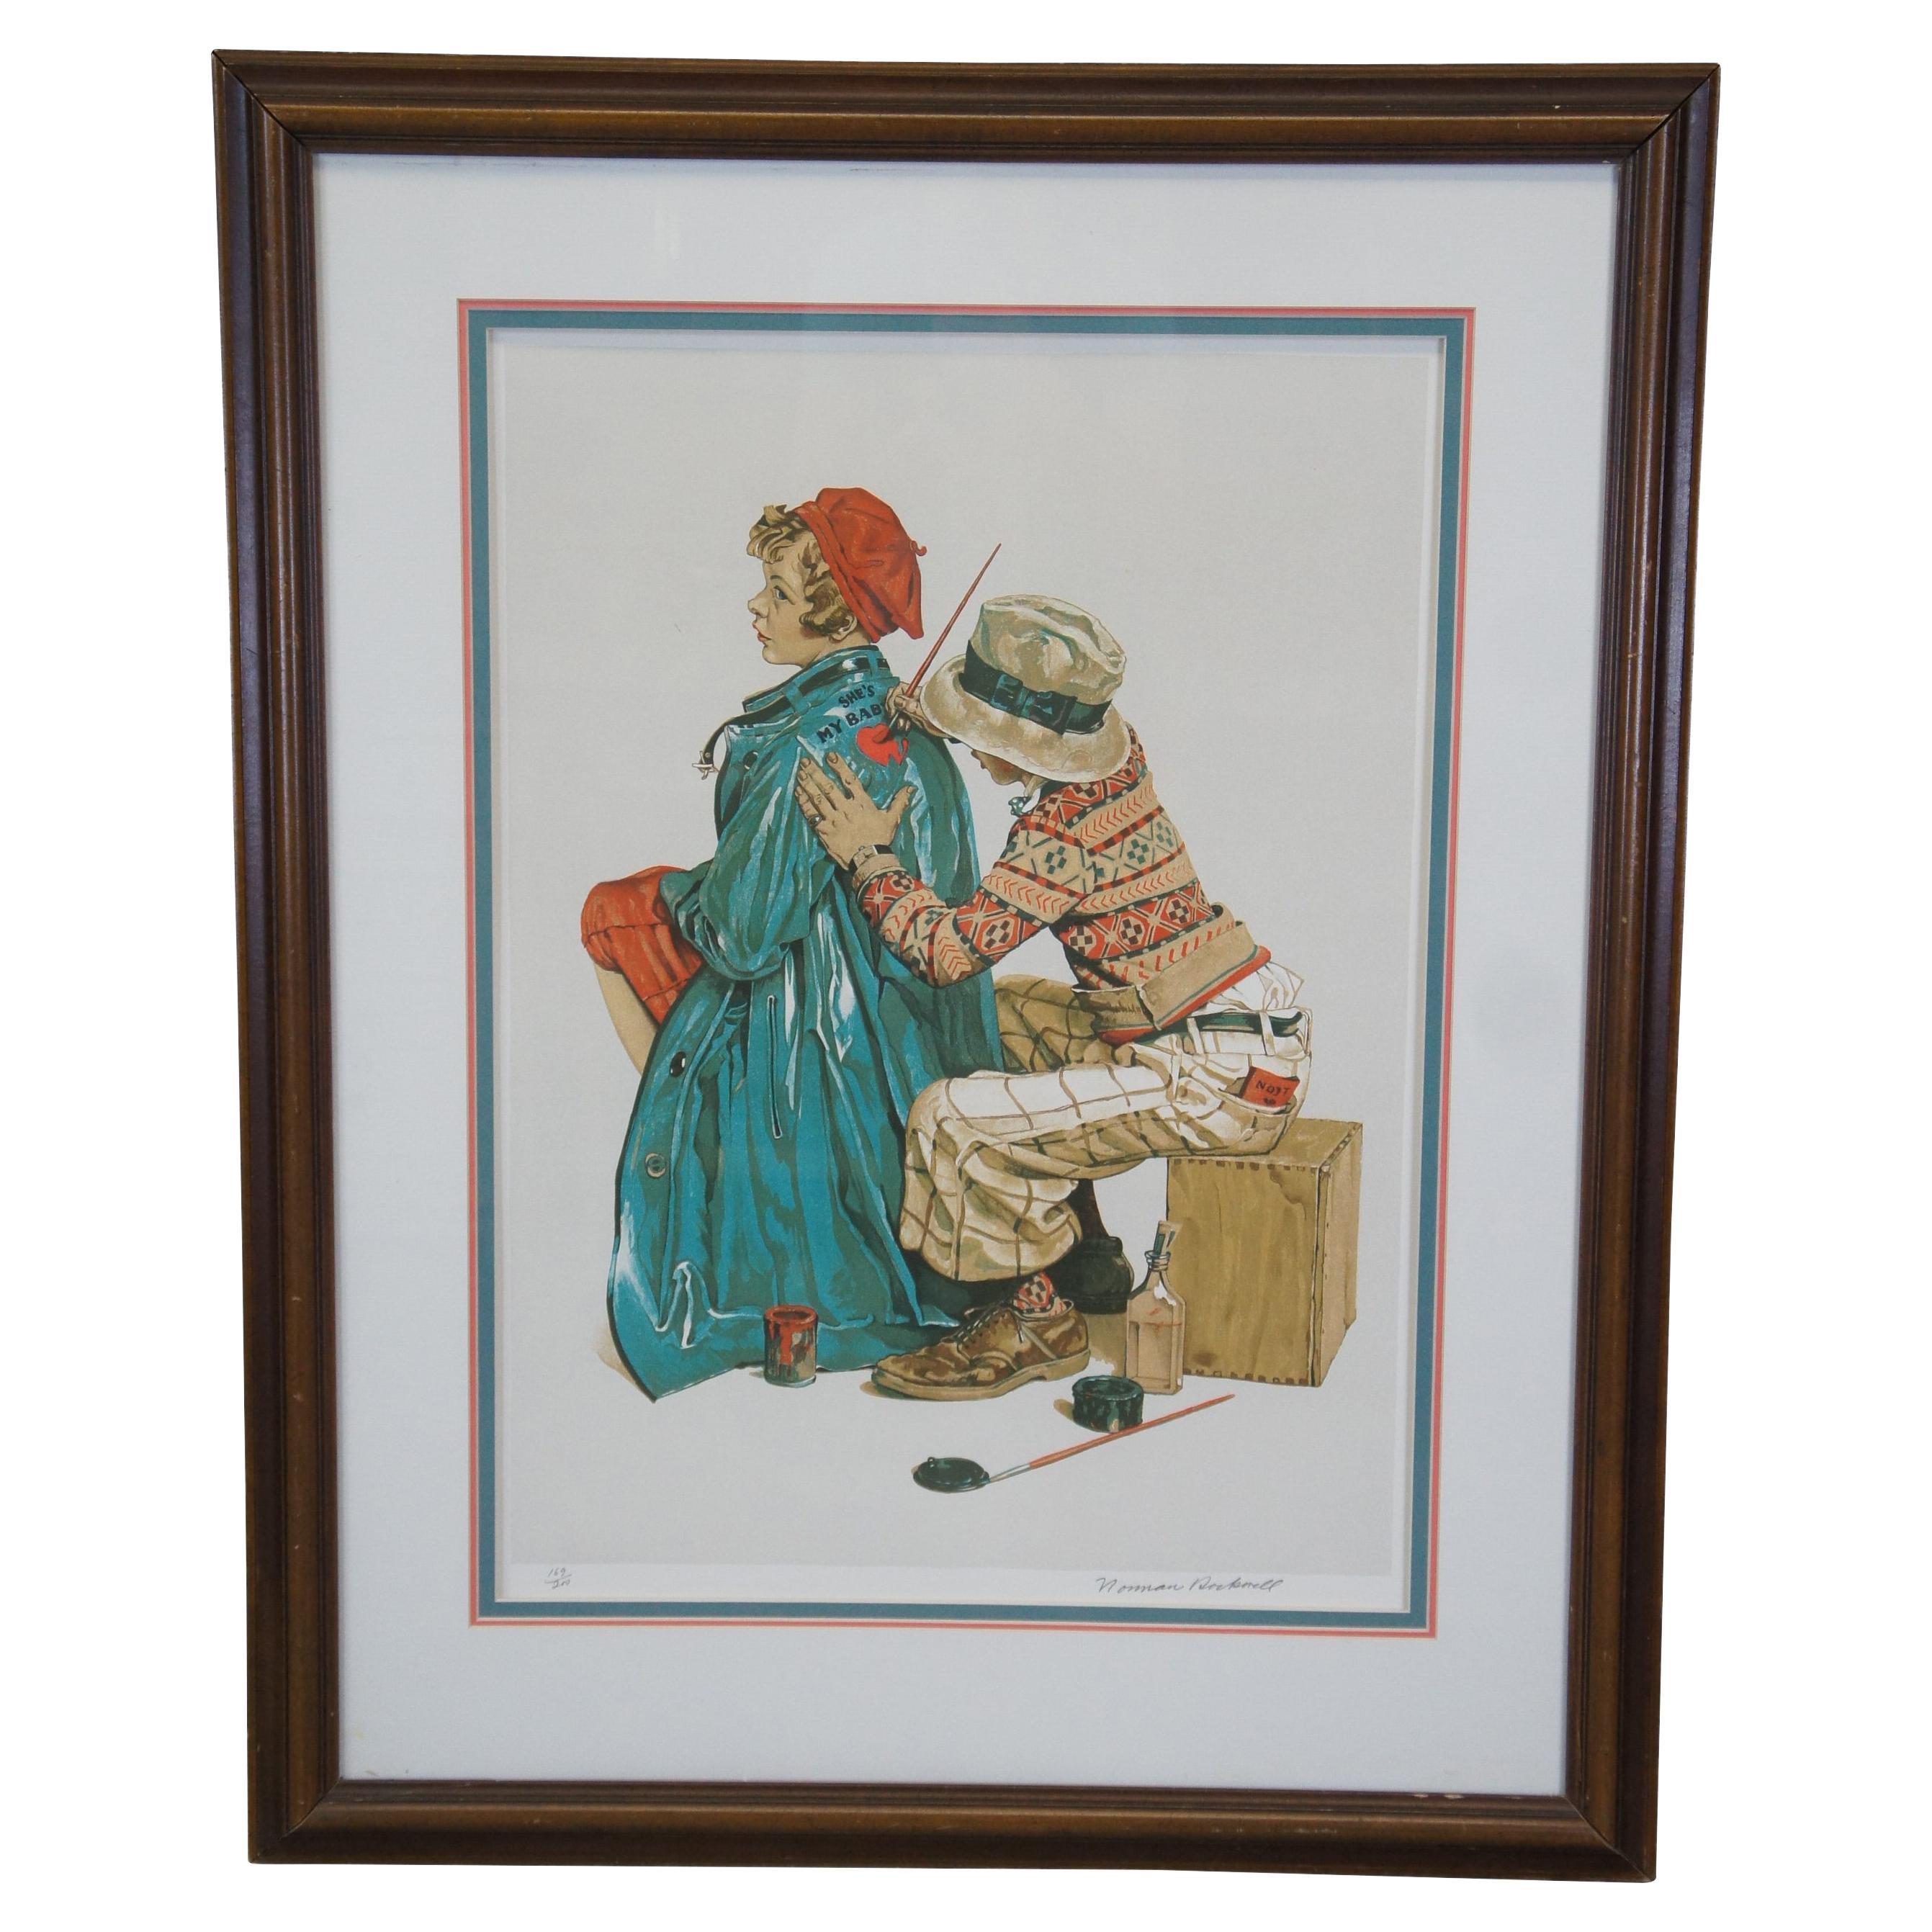 Norman Rockwell "the Young Artist" Hand Signed Original Framed Lithograph